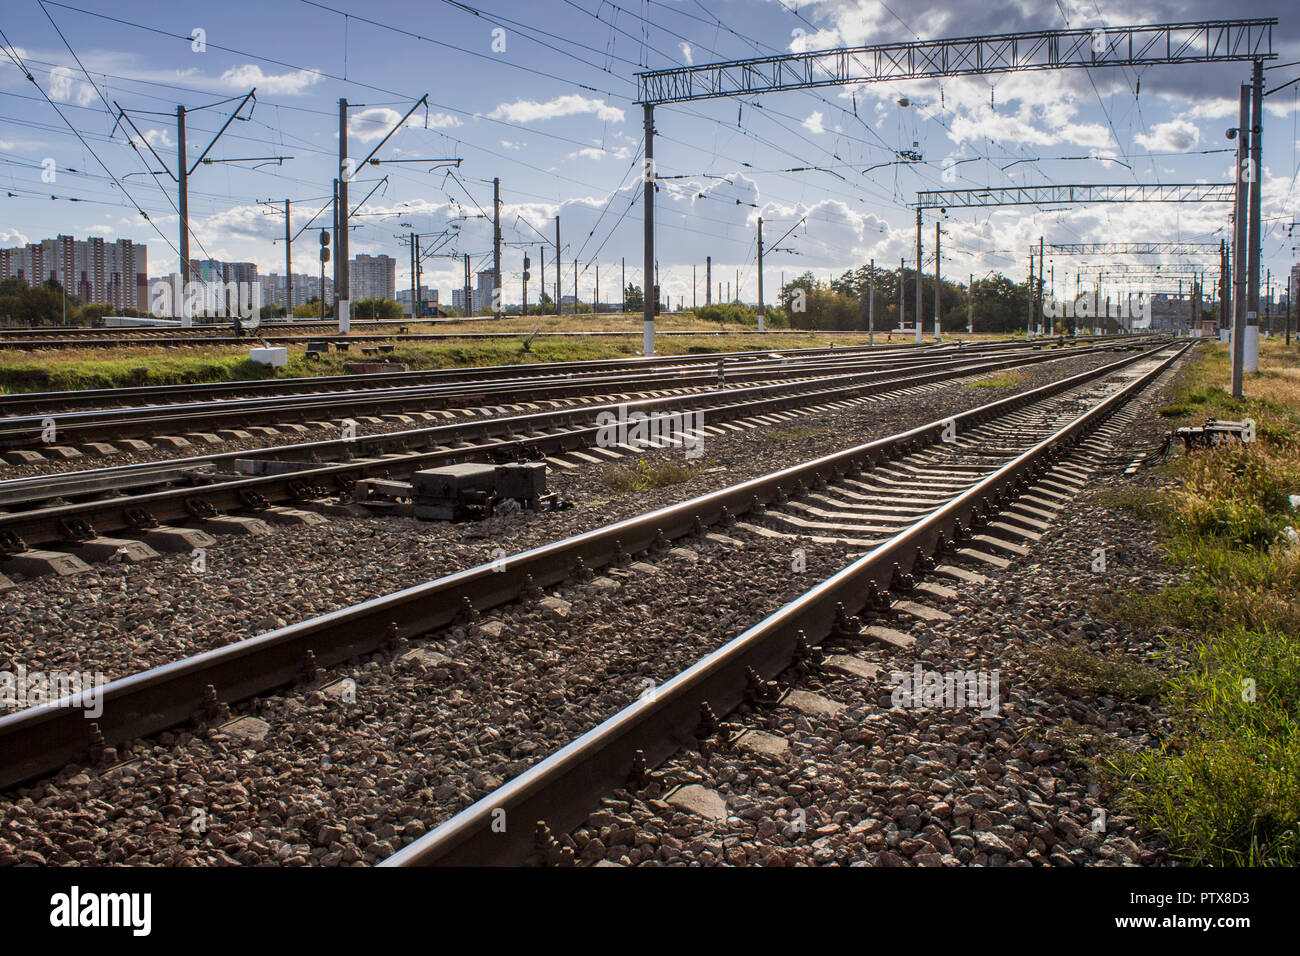 Railroad urbanistic landscape. No people. Perspective view Stock Photo